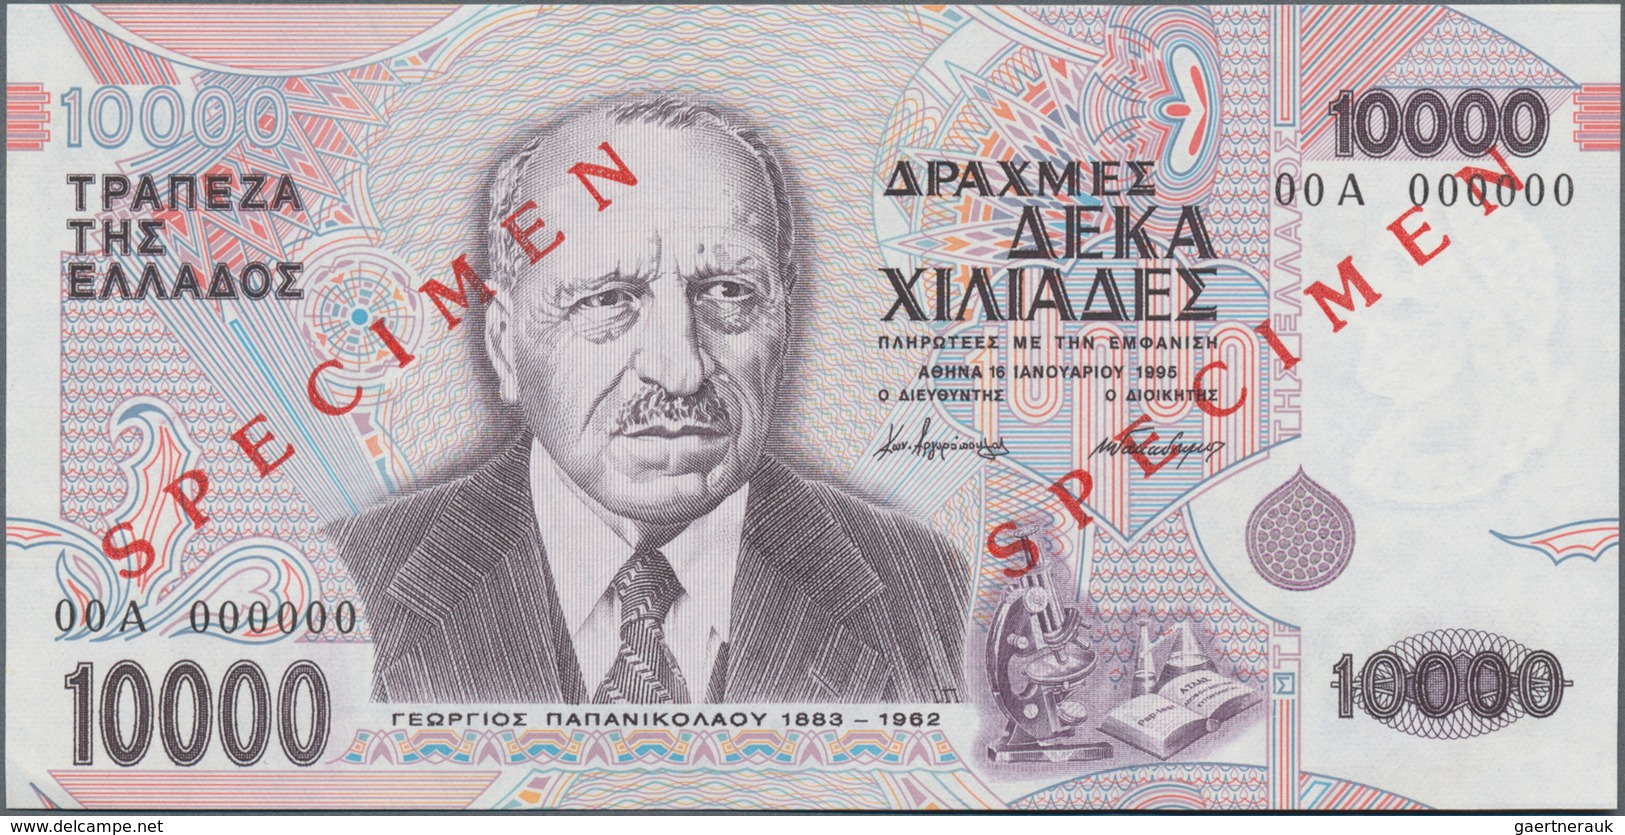 Greece / Griechenland: 10.000 Drachmai 1995 SPECIMEN, P.206s With Serial Number 00A 000000 And Red O - Griechenland